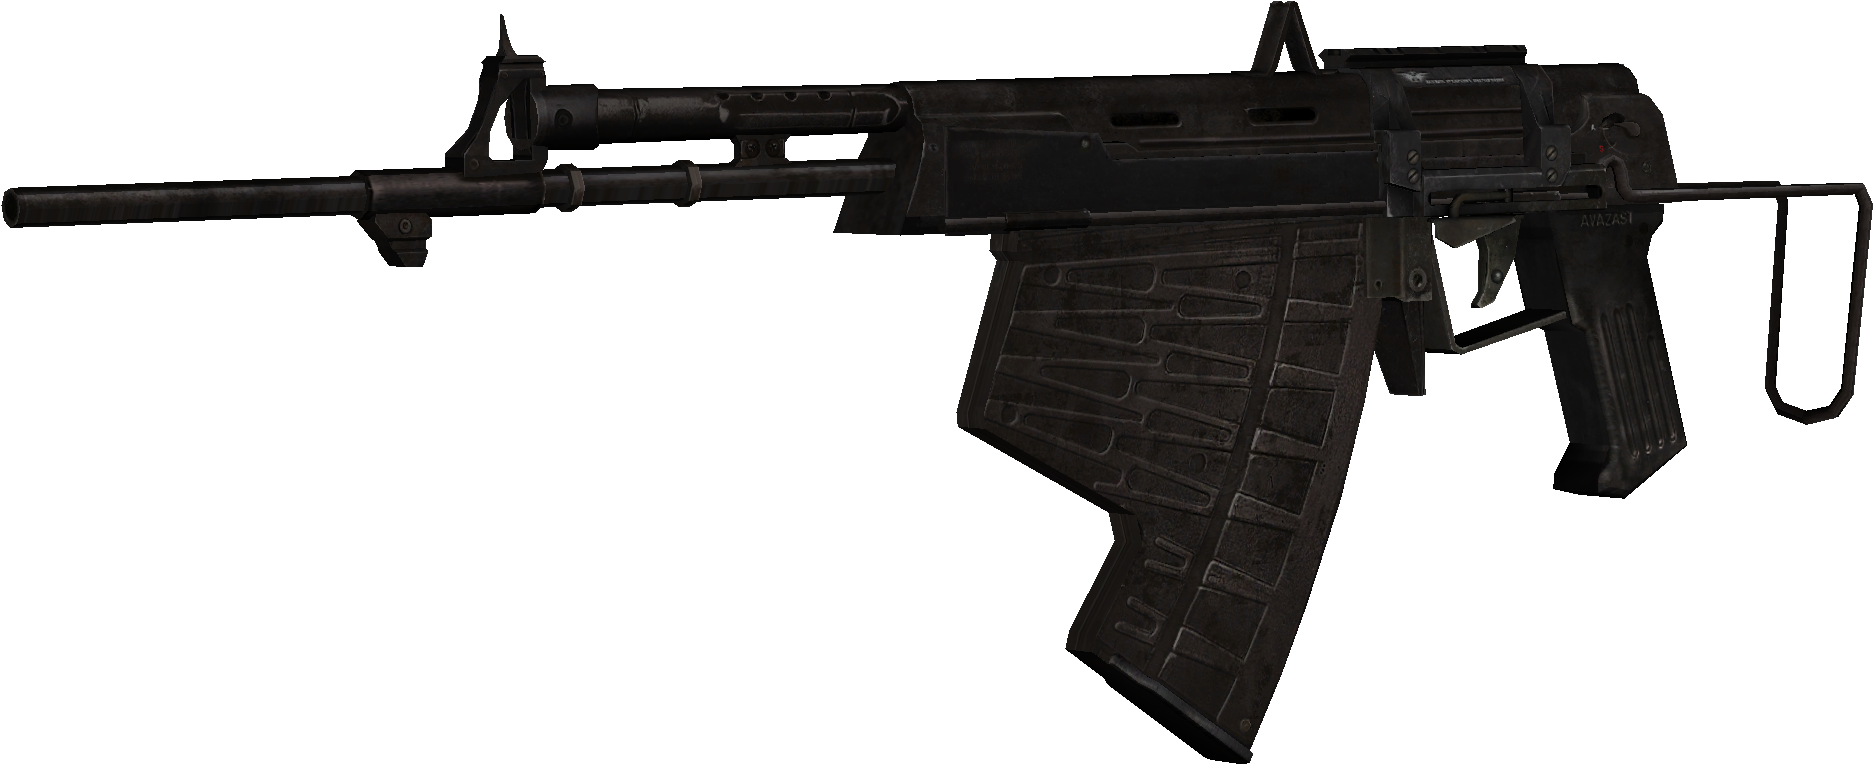 Call Of Duty Black Ops 3 Images - Cod Ghosts Aps Underwater Rifle (1890x795)